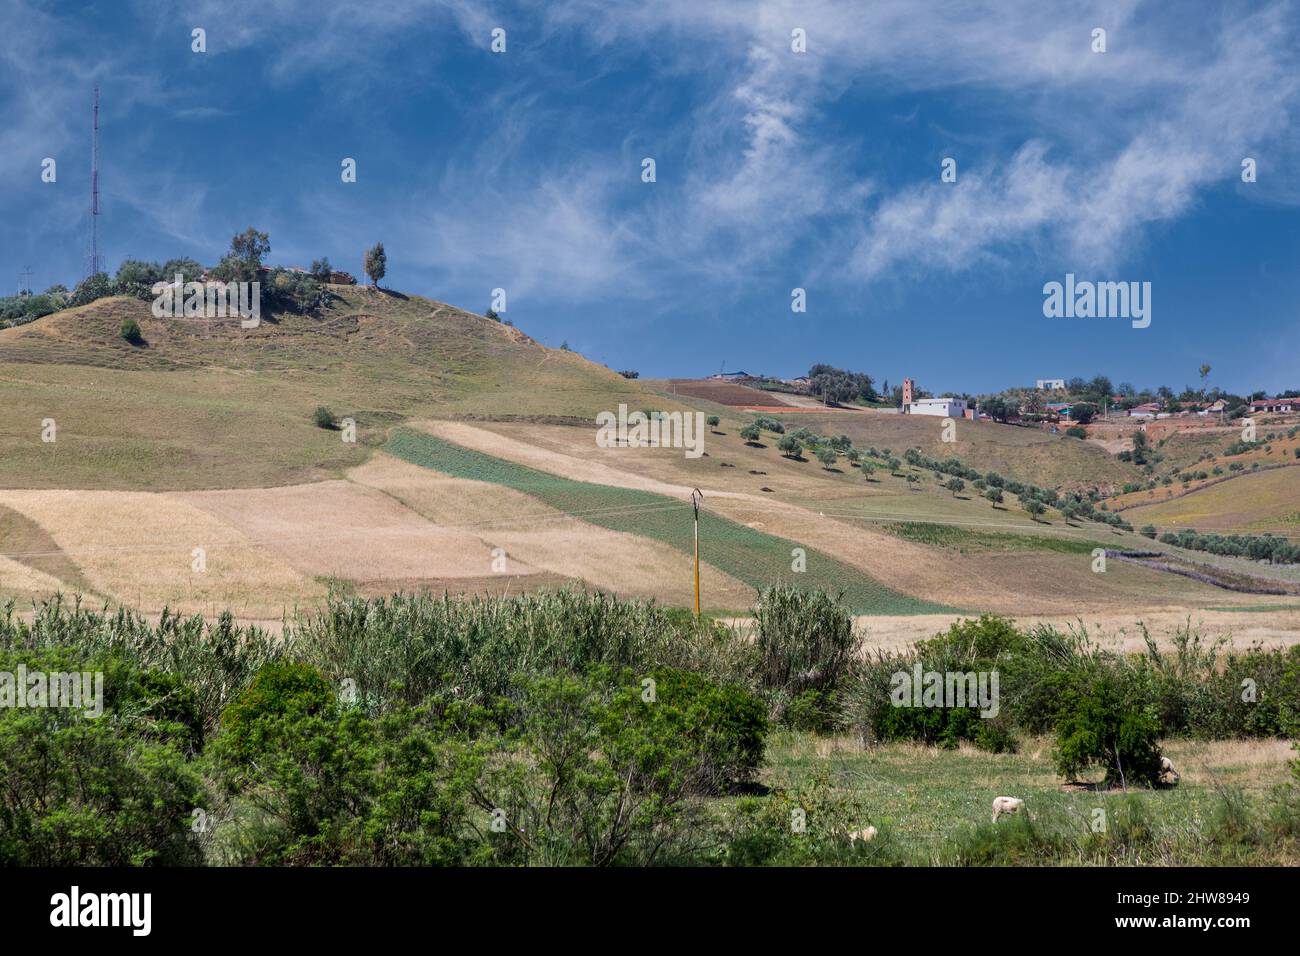 Rif Countryside, Northern Morocco.  Communications Relay Tower, Village, Farmland. Stock Photo